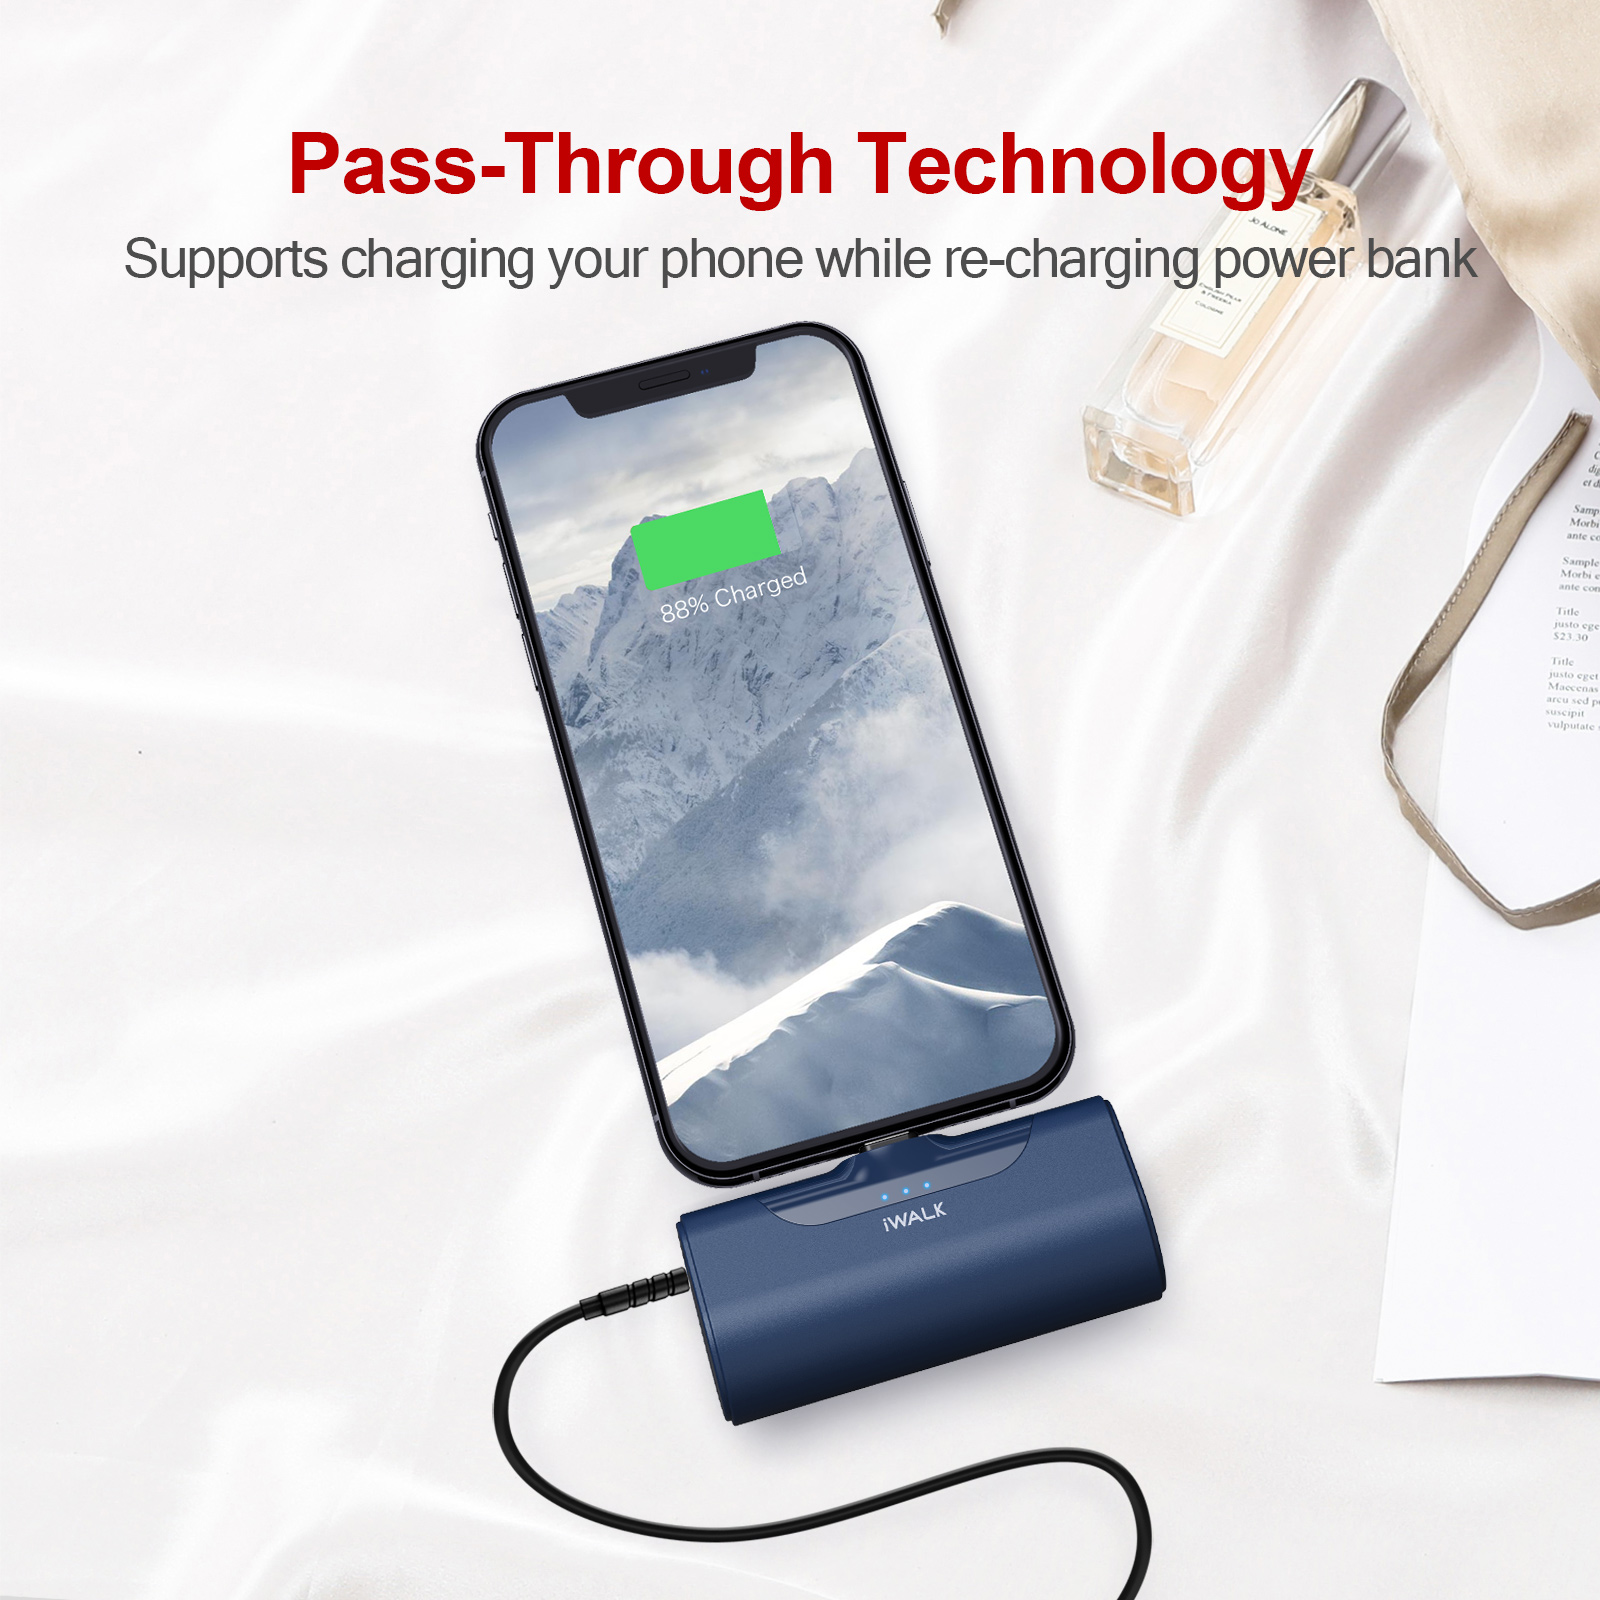 NEW Iwalk Apple Phone Portable Charger 4500Mah Ultra-Compact Small